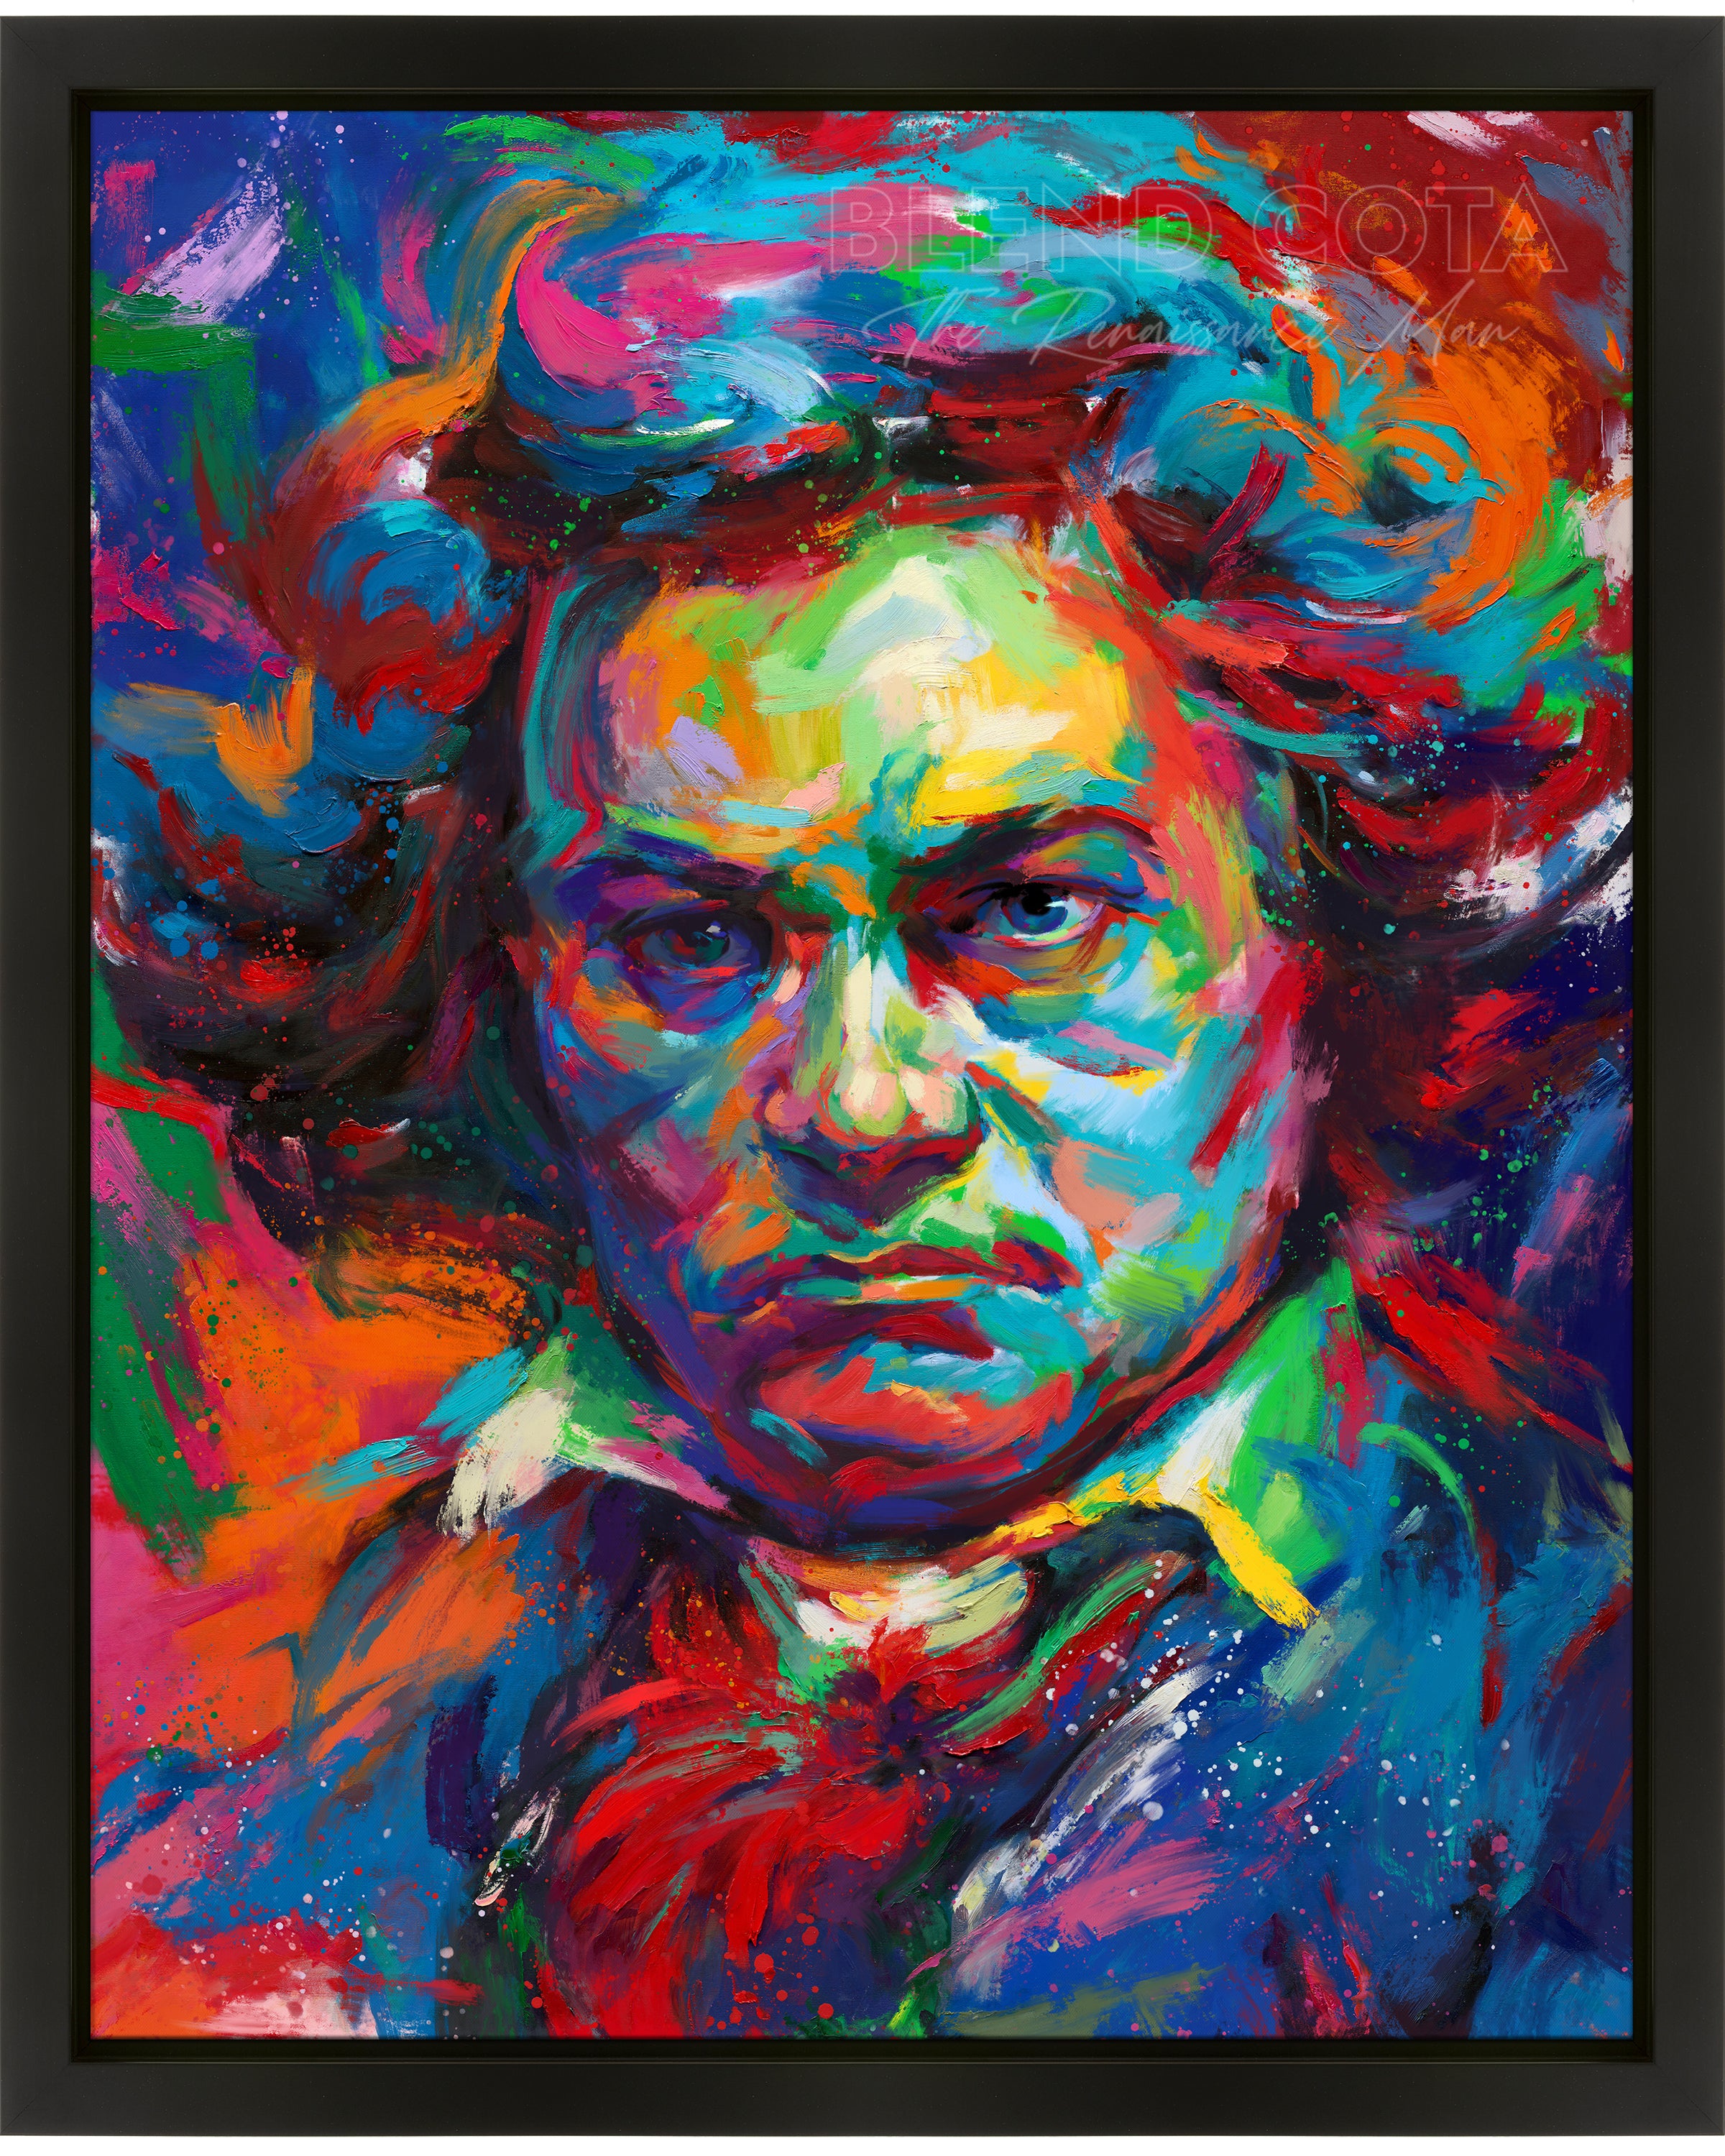 Beethoven - A Symphony of Color - Original Oil Painting from Blend Cota Studios in a black drop box  Framed